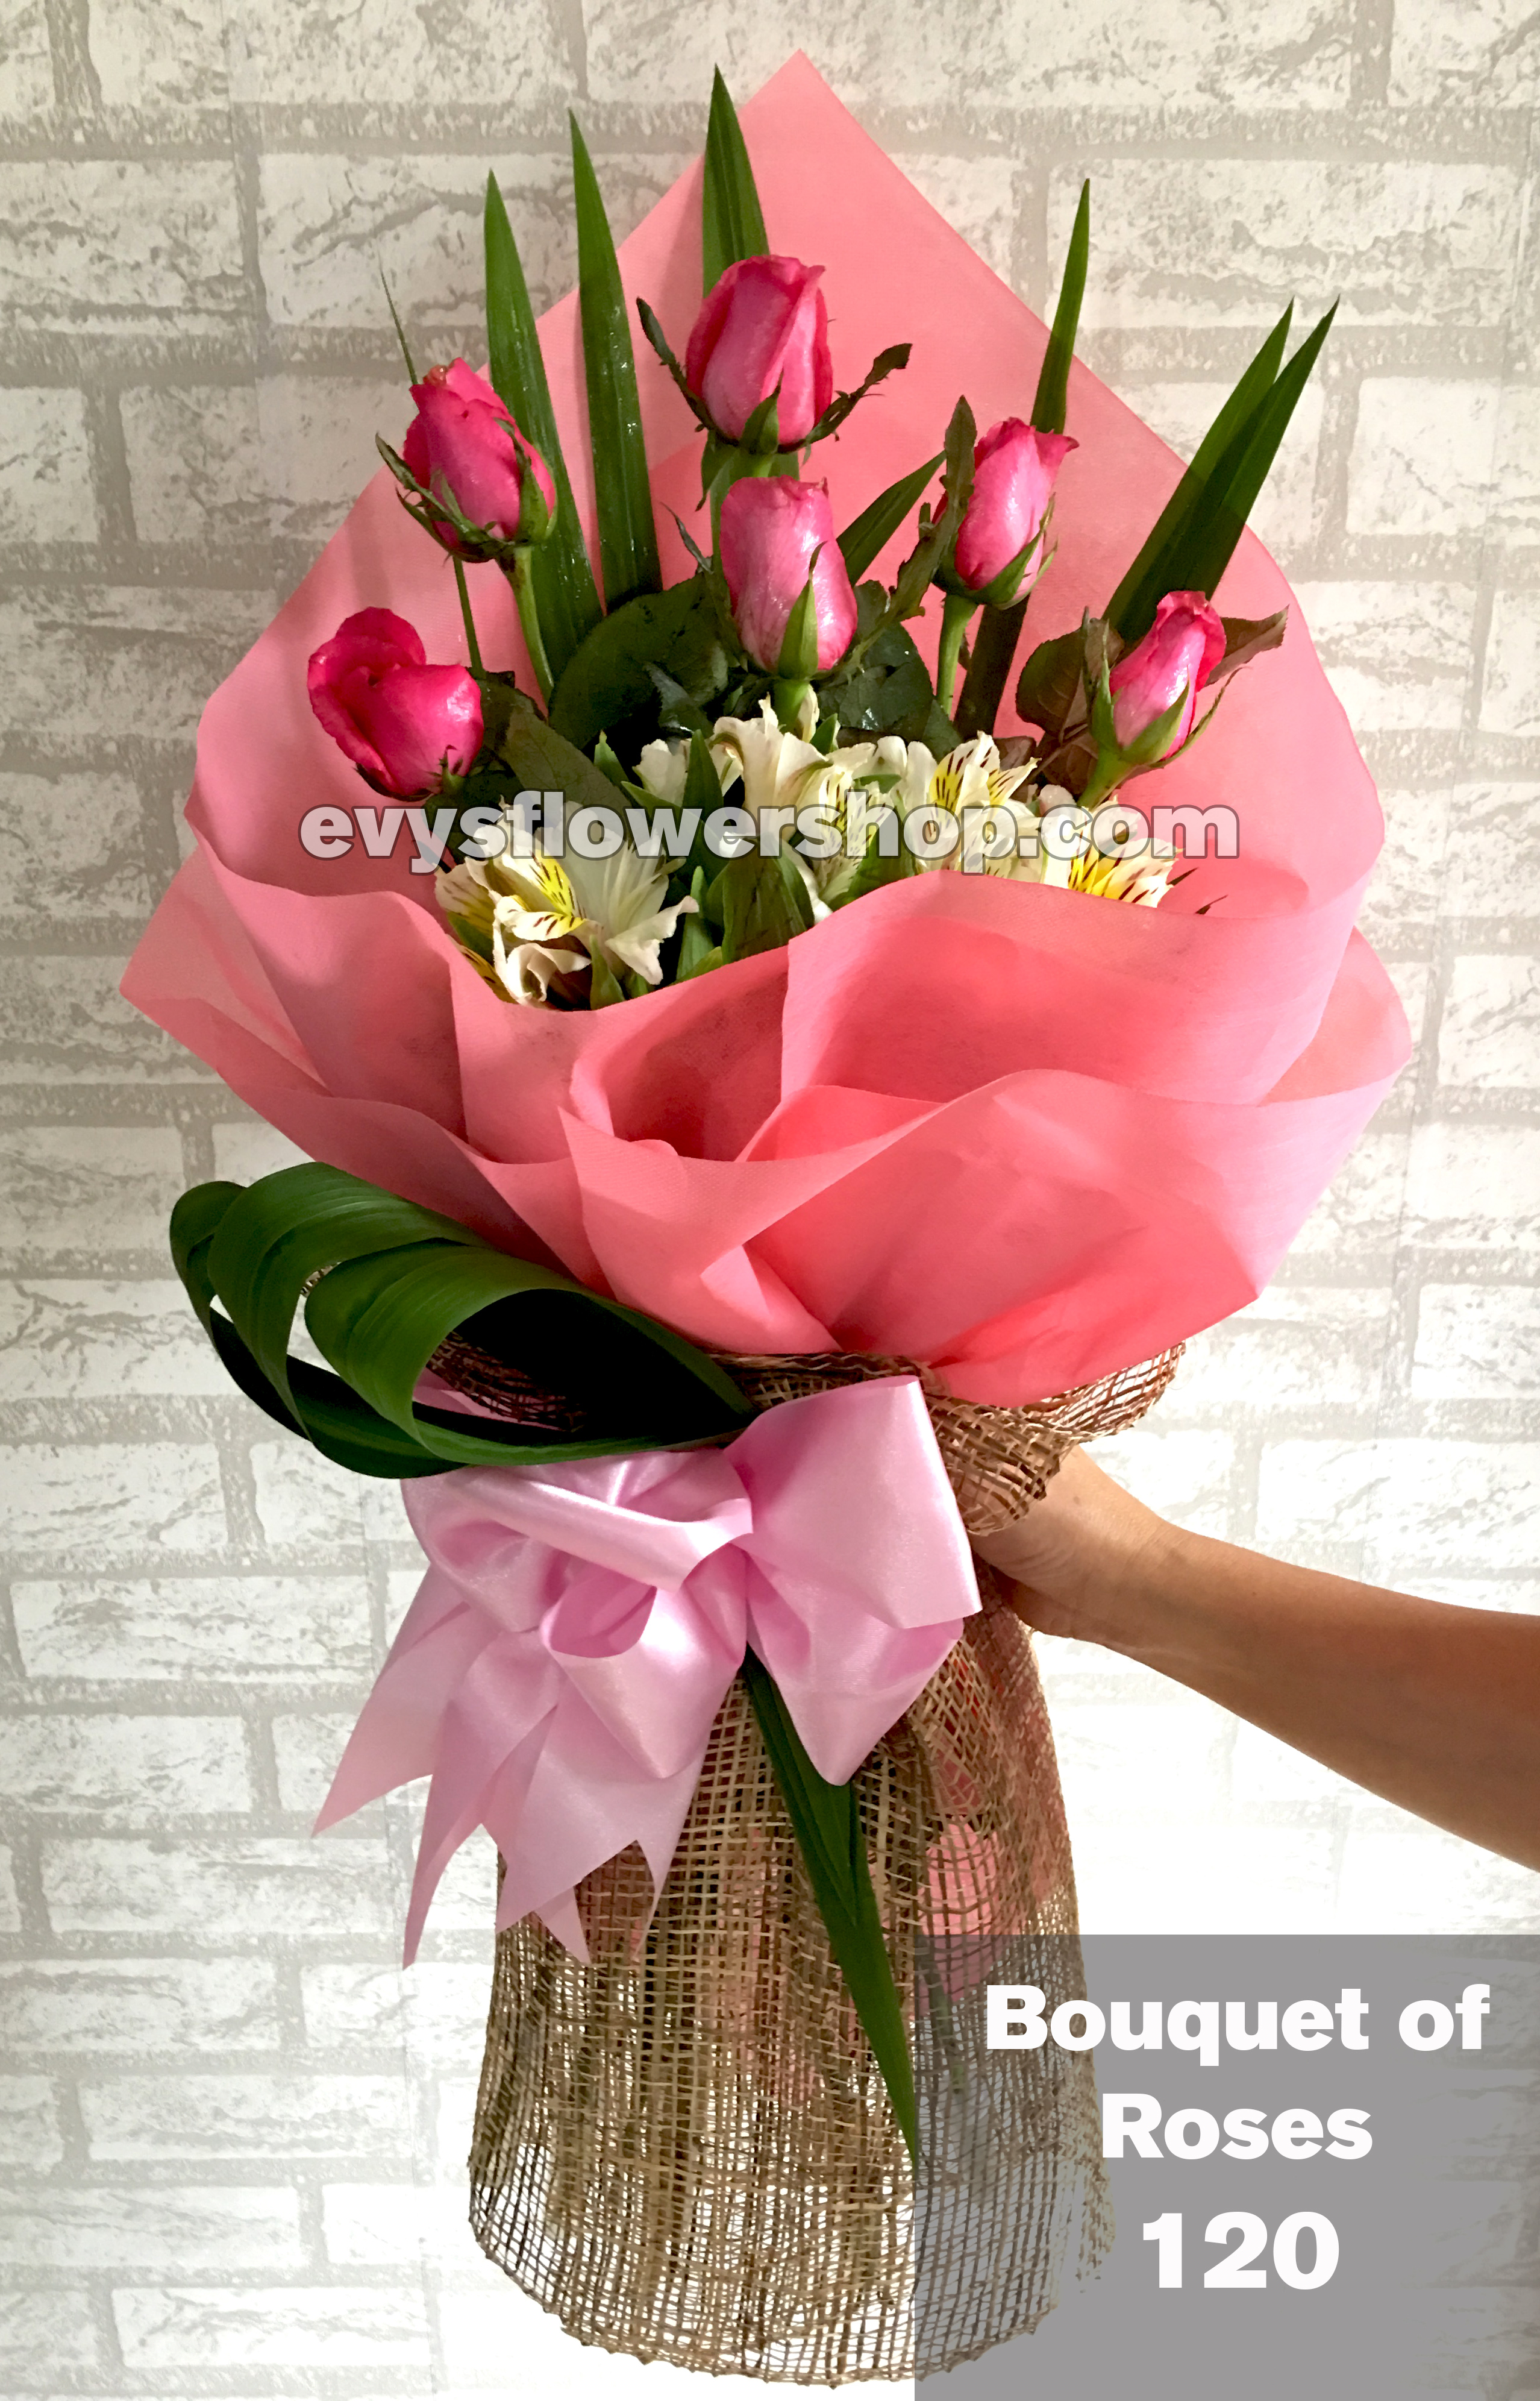 bouquet of roses 120 - EVYS FLOWER SHOP FREE DELIVERY